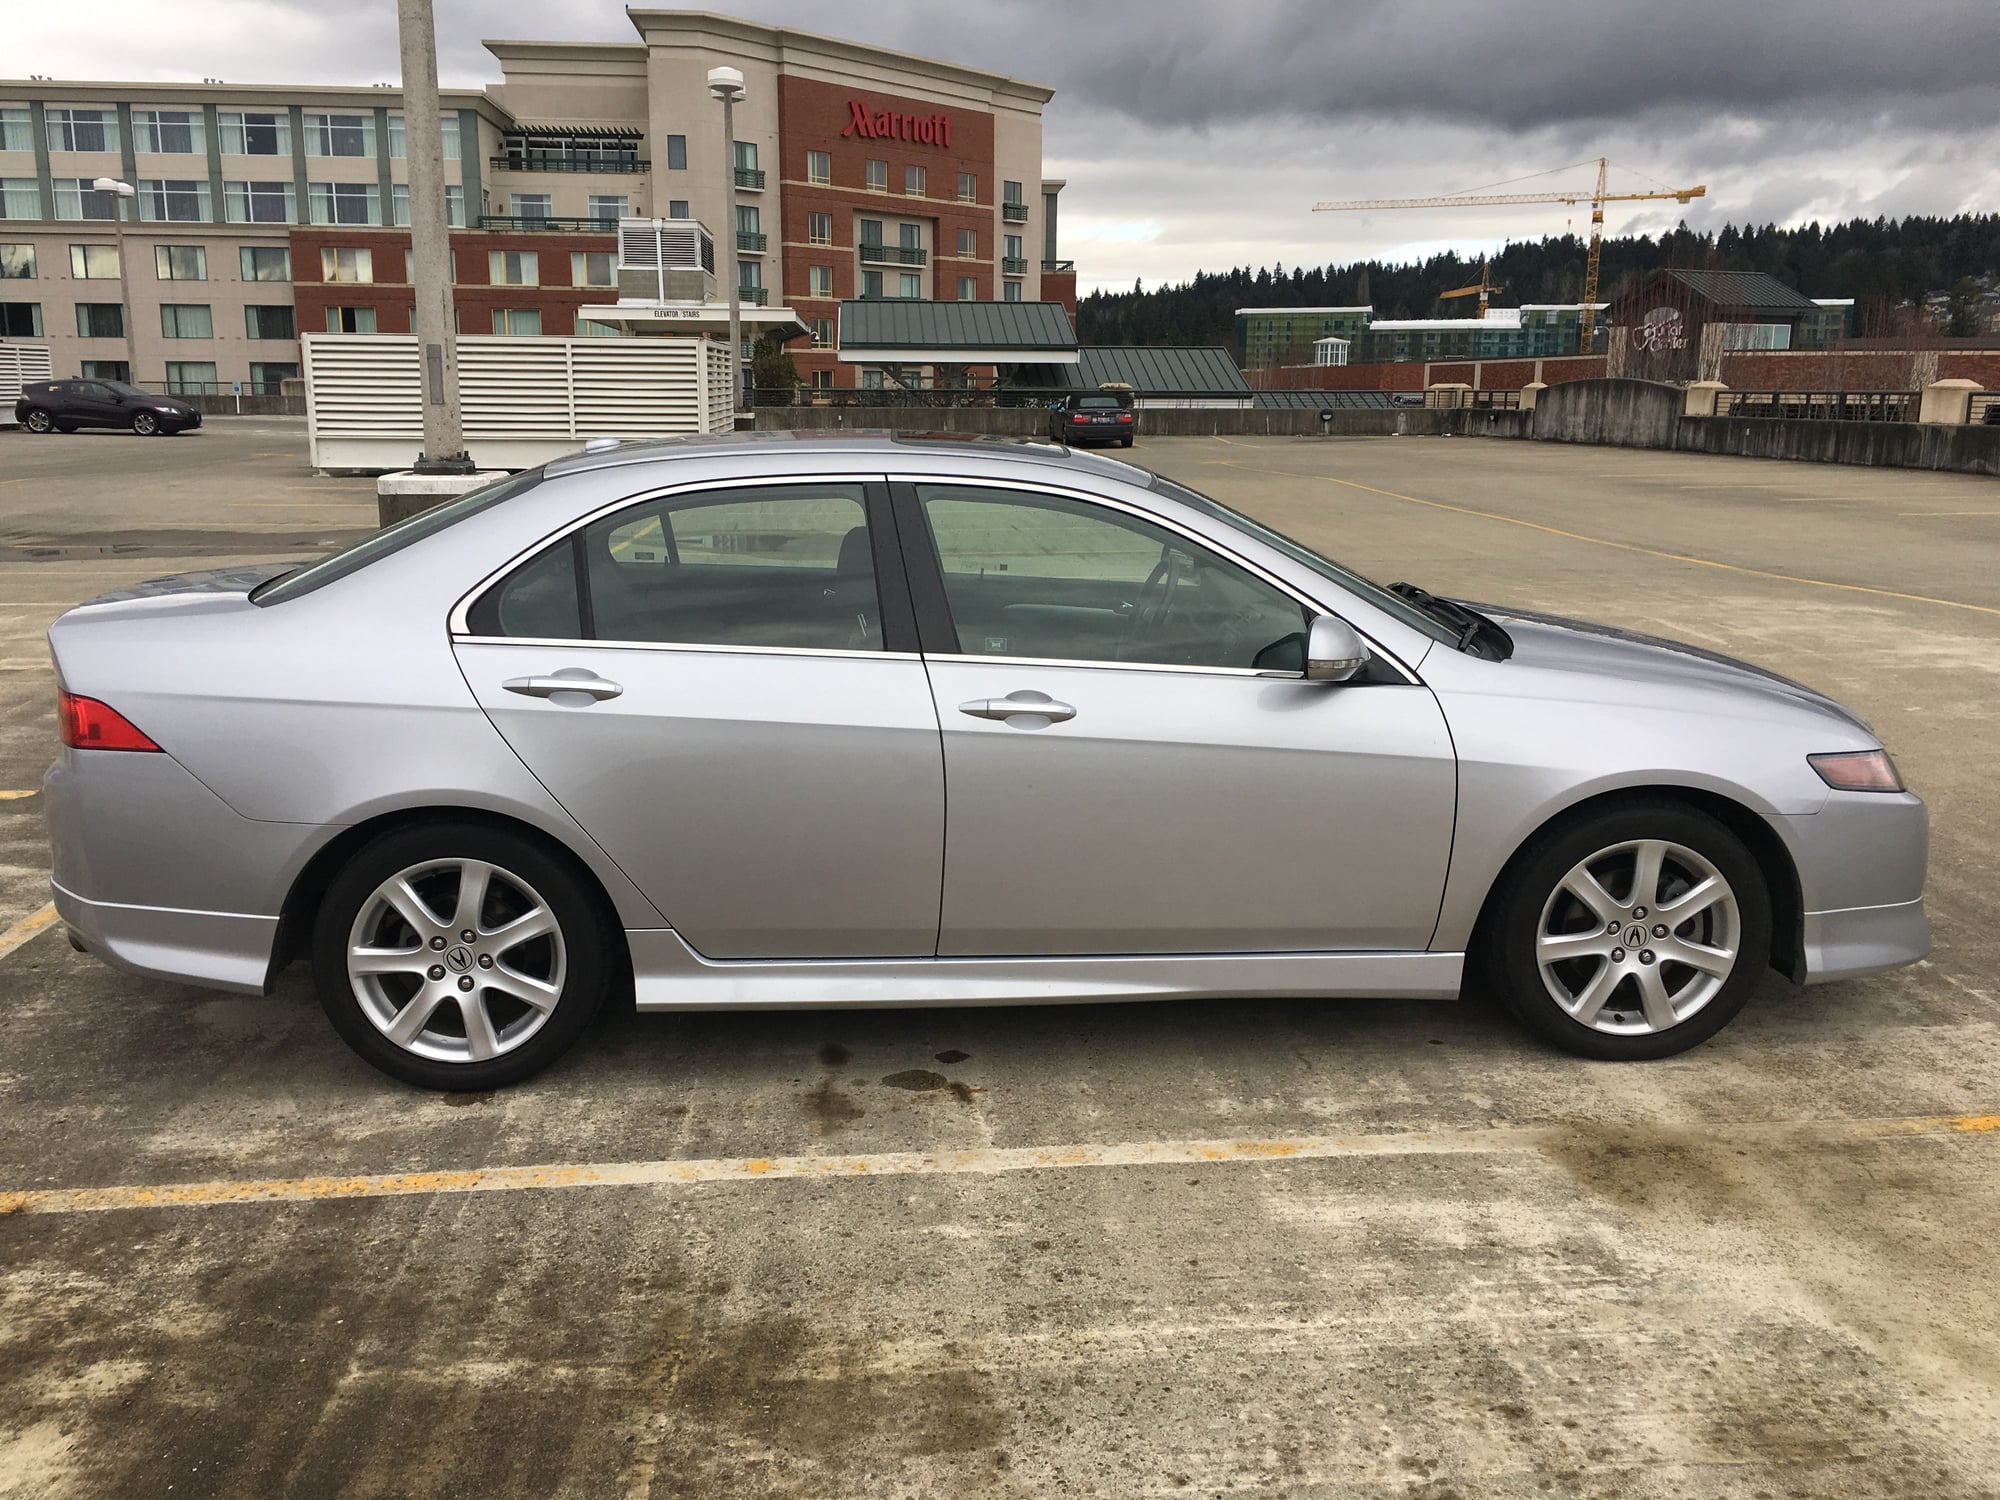 2005 Acura TSX - SOLD:  2005 Acura TSX - 6 Speed MT - Navigation (Bellevue, WA) - Used - VIN JH4CL95905C014369 - 124,700 Miles - Manual - Silver - Bellevue, WA 98006, United States